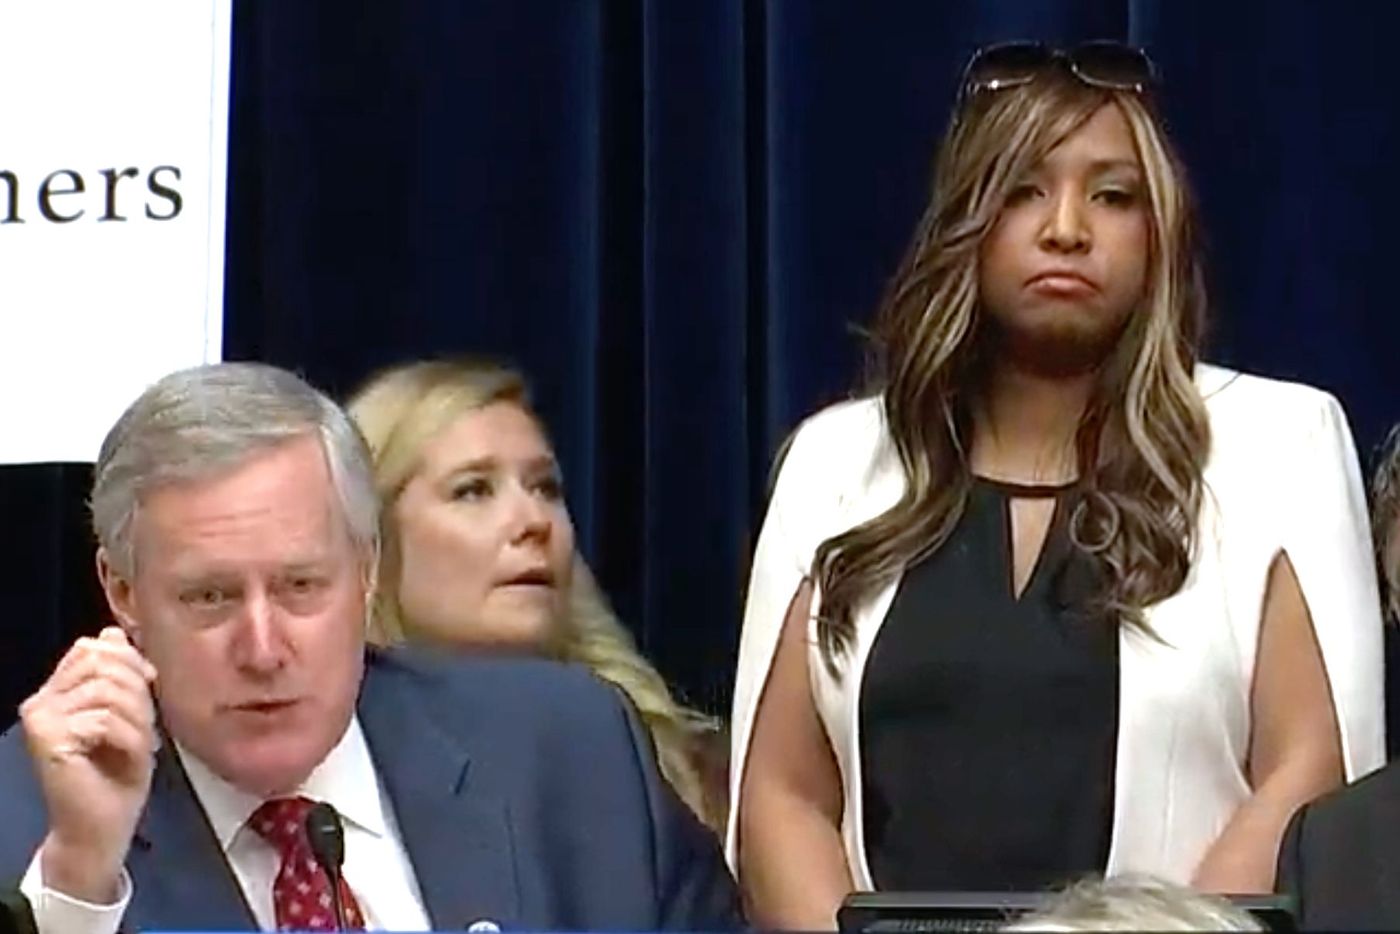 HUD official Lynne Patton stands behind Rep. Mark Meadows (R-NC) during Michael Cohen’s Congressional hearing, Feb. 27, 2019.